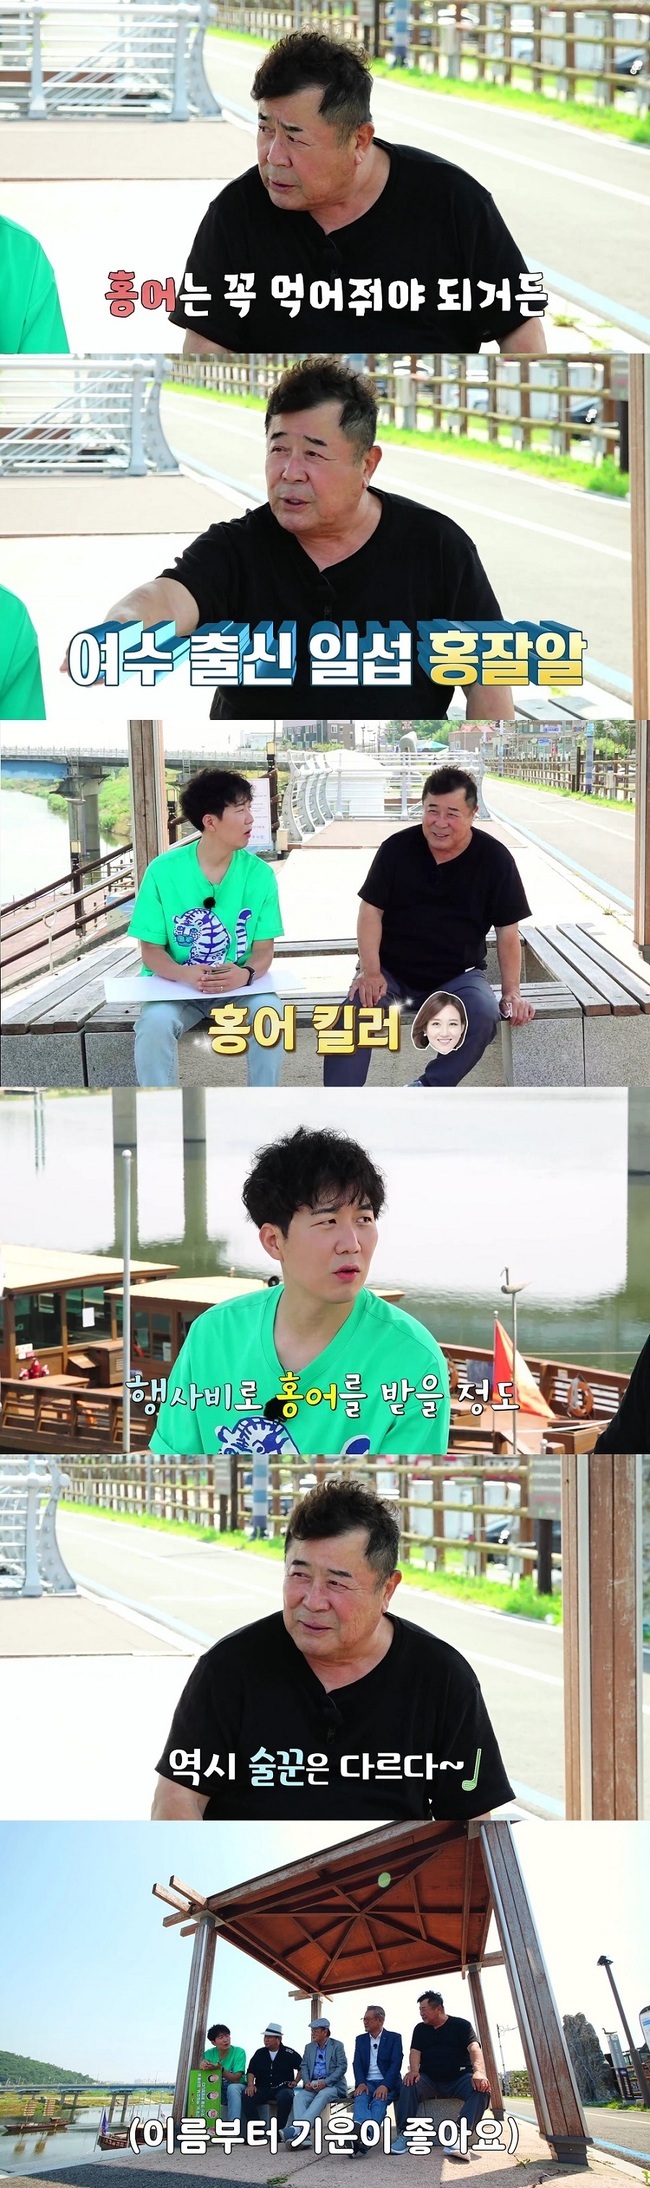 Do Kyoung-wan, a docady, revealed his love affair with a sincere worry about his wife Jang Yun-jeong.MBN Grand Par, which will be broadcast on July 17, is a golf wanderer that captures a bout between South Koreas leading actor and veteran golfers, Lee Soon-jae, Park Geun-hyung and Baek Il-seob and Lim Ha-ryong.The average age of 79 years old, who is active in the screen and the screen, and the versatile Do Kyoung-wan, together with the four-member flower group, tell the story of life on the field throughout the country.In this broadcast, the same game rule as the first round will be held in Gangwon Province and the second match between the Grandpas who took a prize for the grilled red duck.In addition, the Grandpa, which was the second golf wandering season with the central provision of Girona of Jeolla province, is also drawn.Do Kyoung-wan, who arrived at the Yeongsan River Huangpo Sailboat Naruta first, made a careful preliminary visit and prepared a meticulous schedule for Grandpa.At this time, Baek Il-seob asked, Do you know about the specialties of Province of Girona? And From Province of Girona to Provide of Girona Gomtang, there are many cases of Yeongsanpo Ocellate spot skaate that treats only precious customers.When you come here, you must eat the olecate spot skate. Docady, please. Do Kyoung-wan said, I was not interested in the original Ocellate spot skaate, but my wife was eating it as an Ocellate spot skaate killer. My wife sometimes gets Ocellate spot skaate instead of Eventby.Baek Il-seob sent Umjichuk, saying, The drinker is different too, and expressed envy, saying, How good is it if the wipes are drunk together?